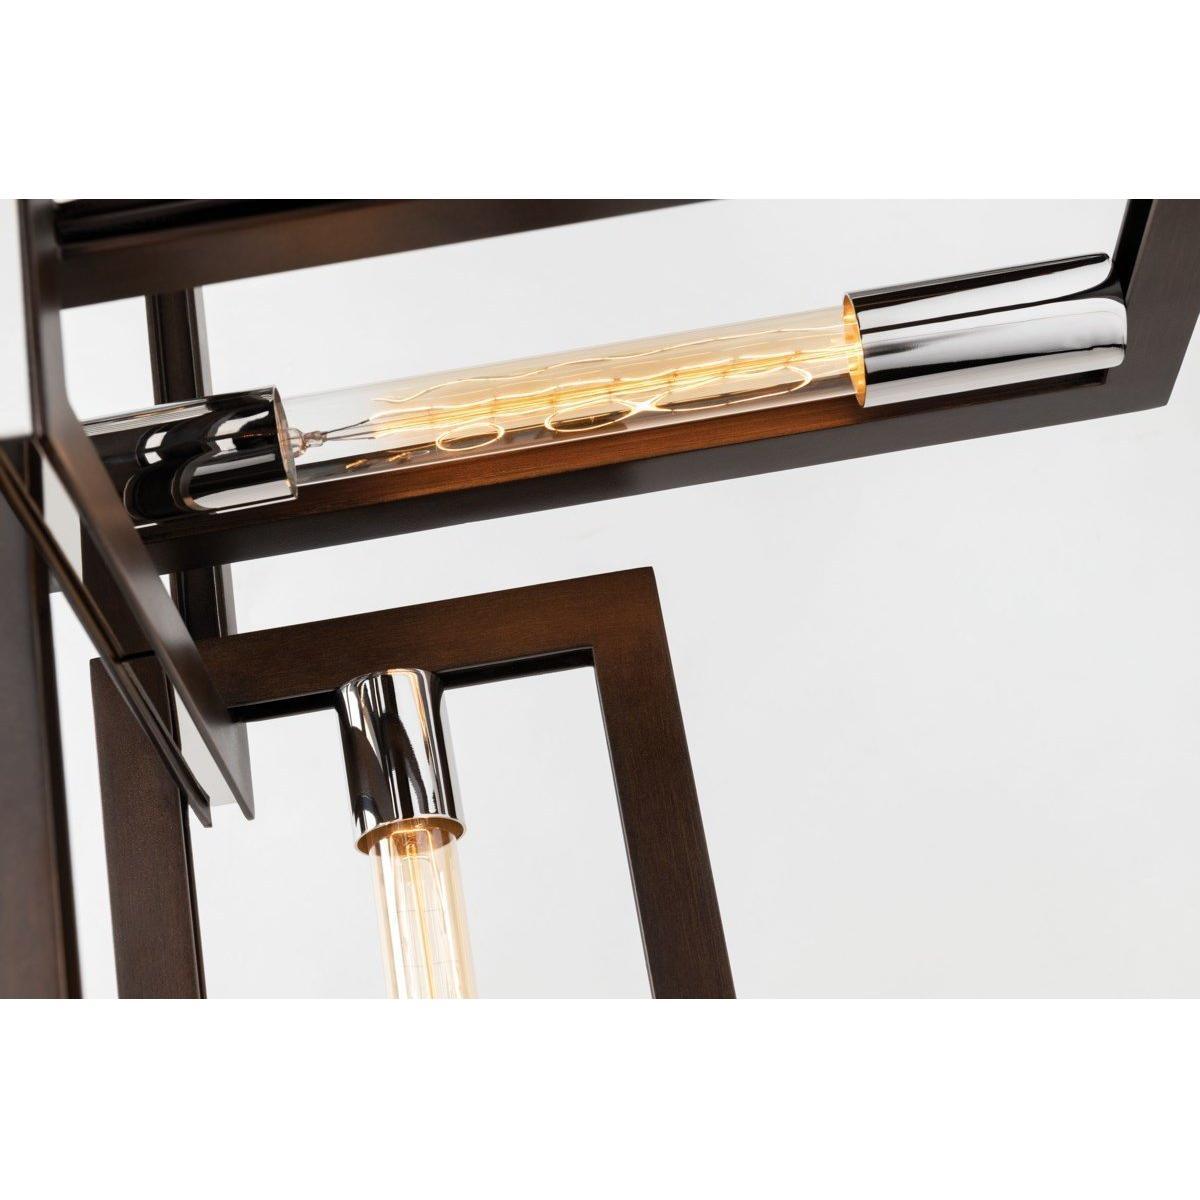 Troy - Enigma Sconce - Lights Canada